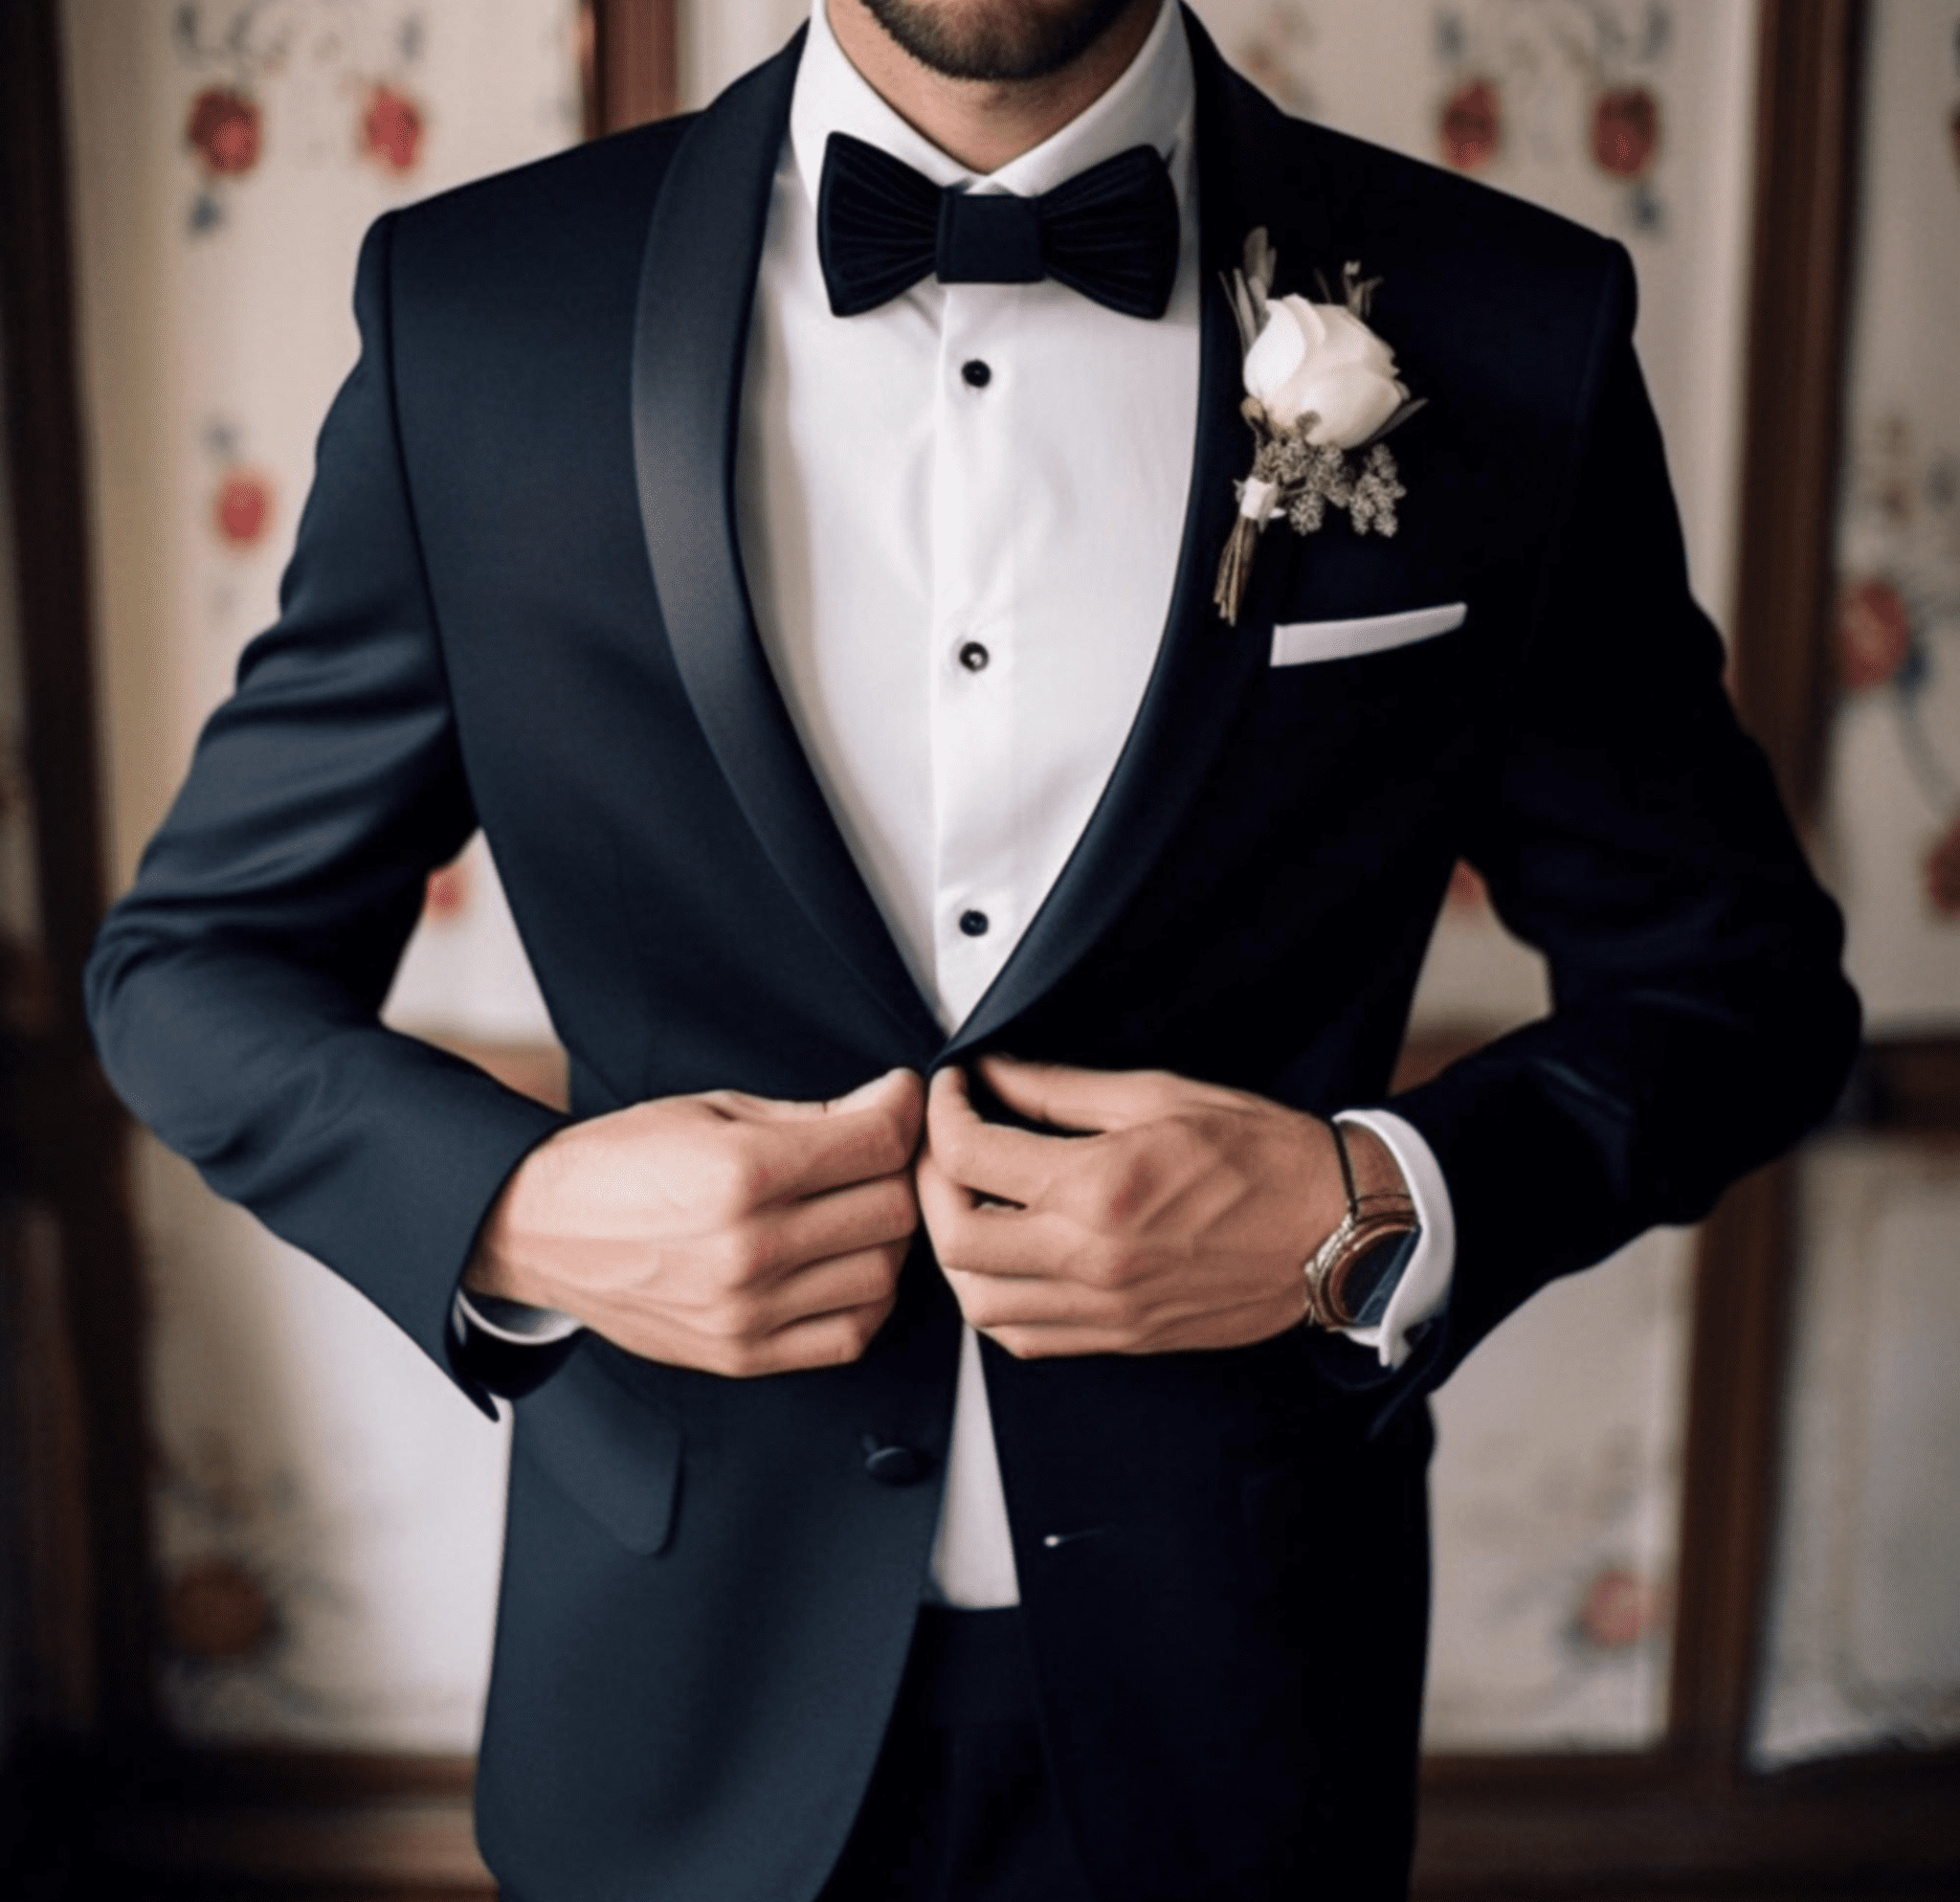 Difference Between Suit and Tuxedo